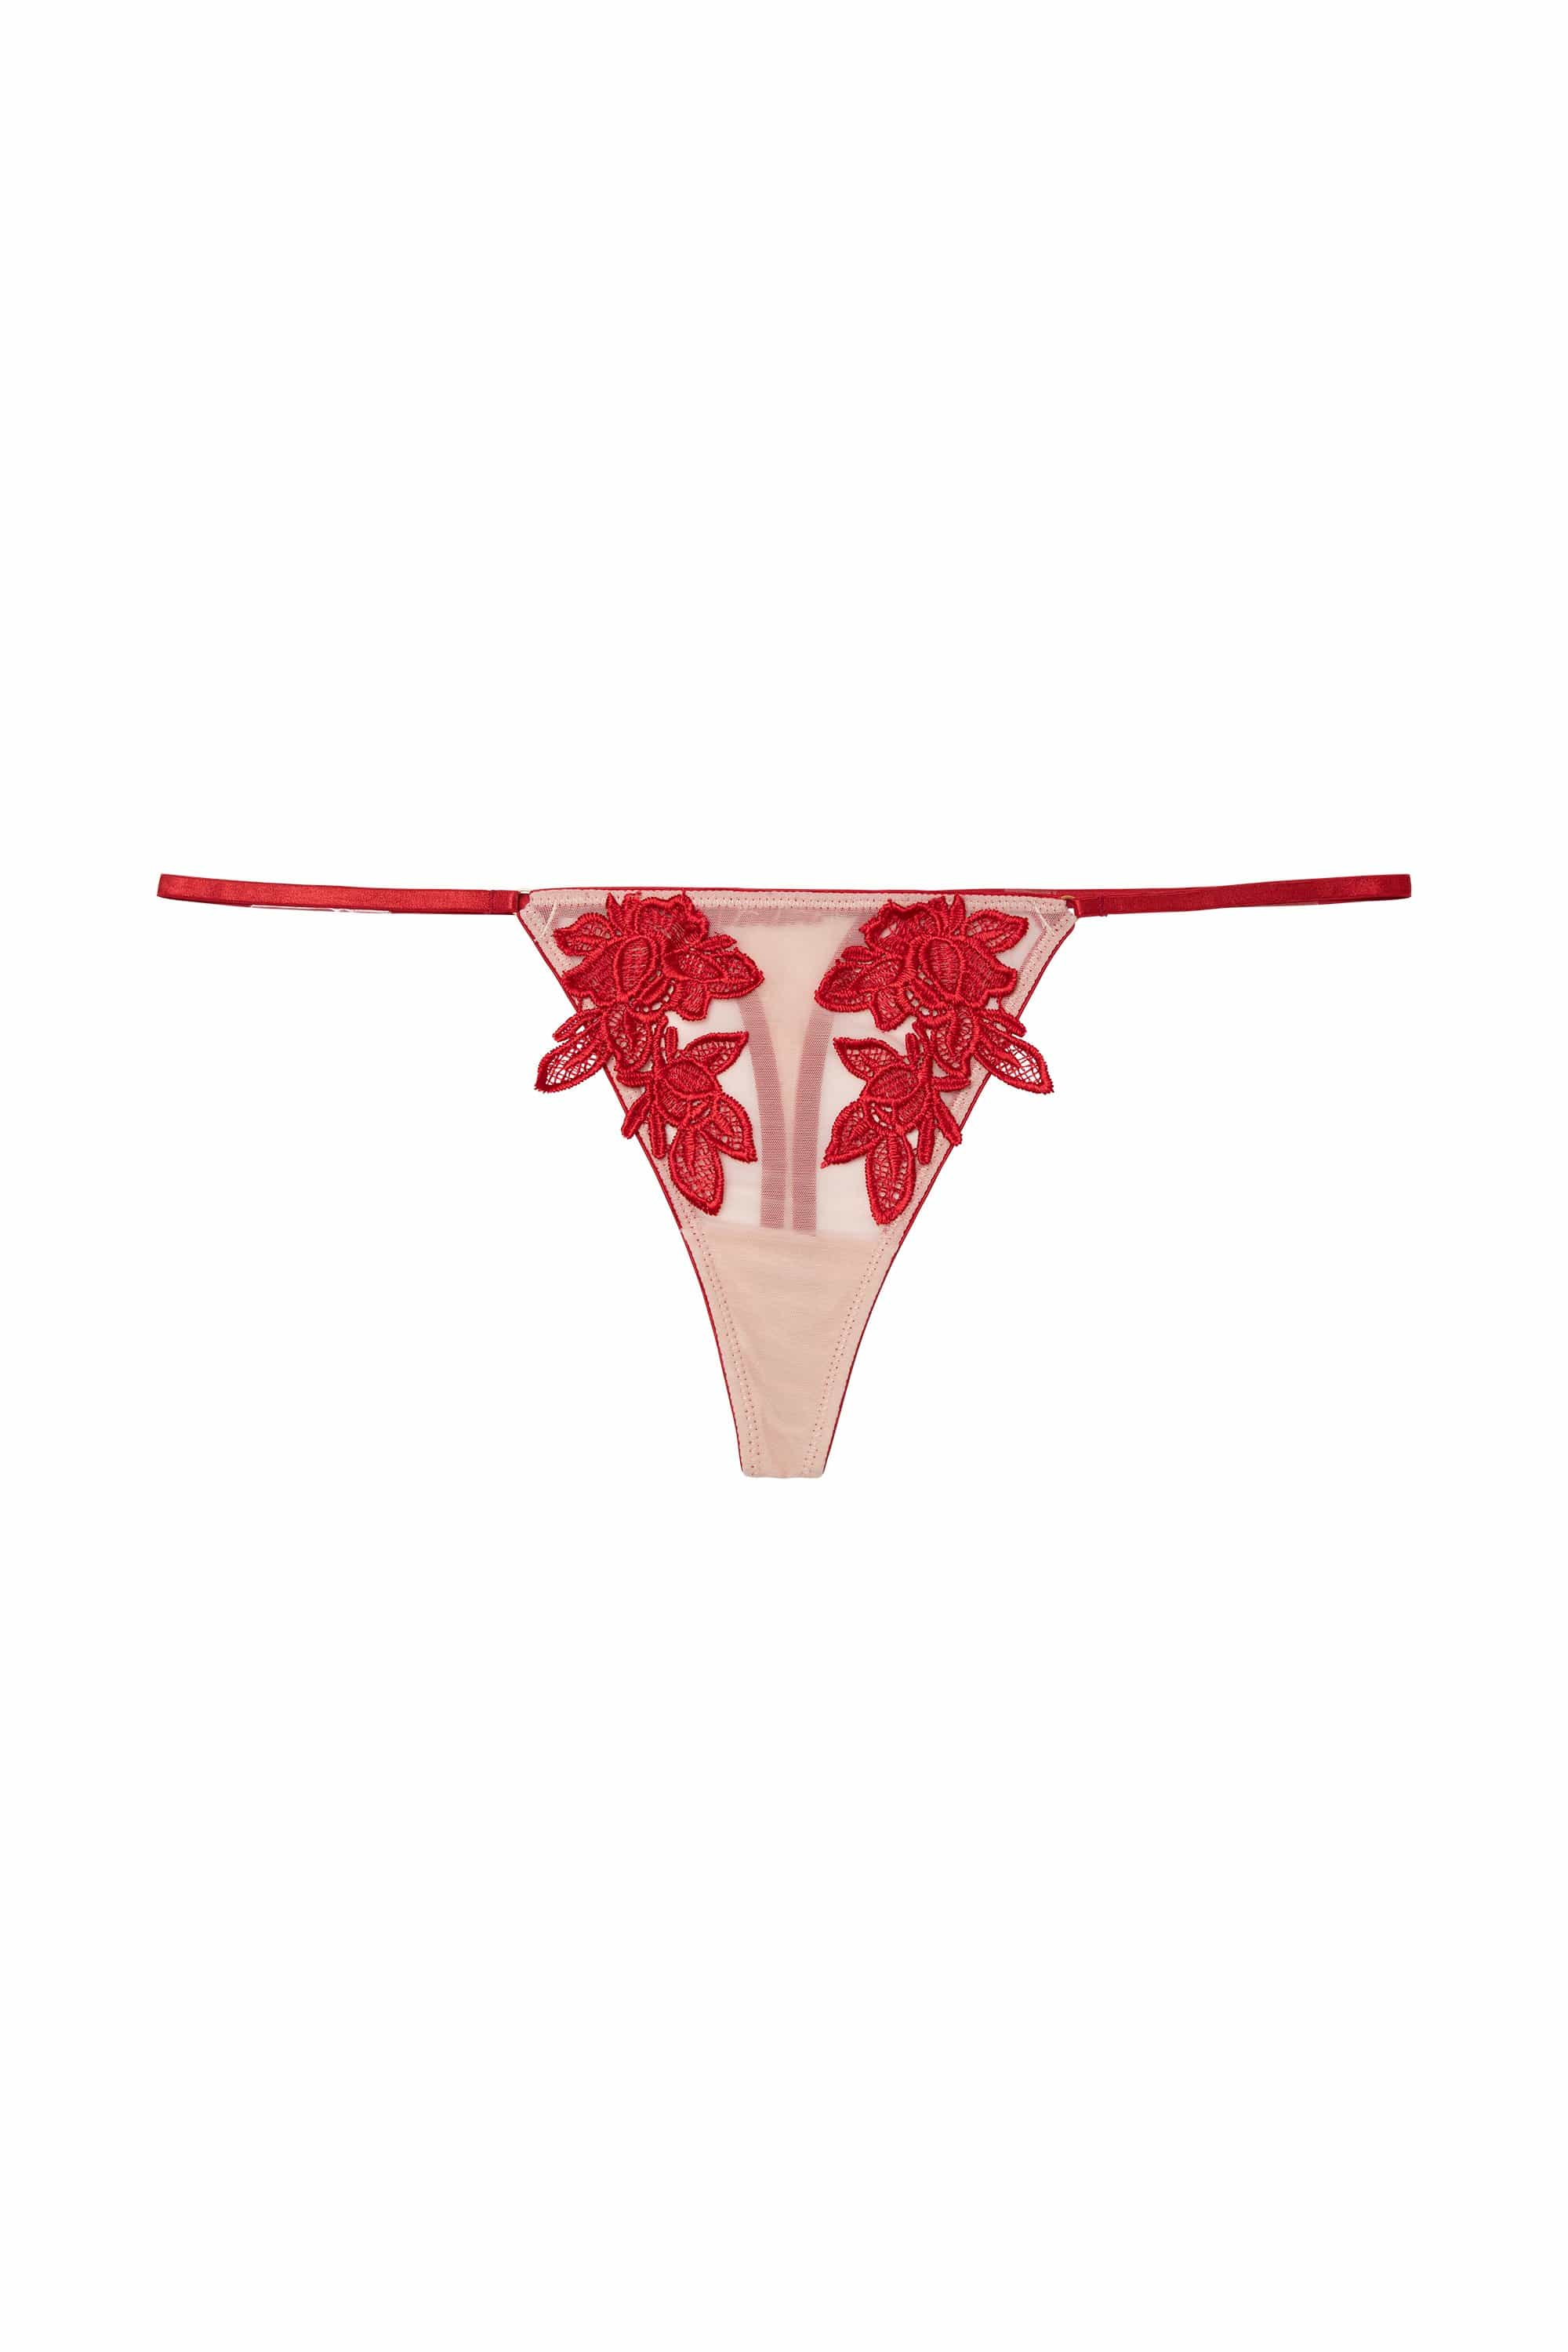 Brooke Red Applique Thong